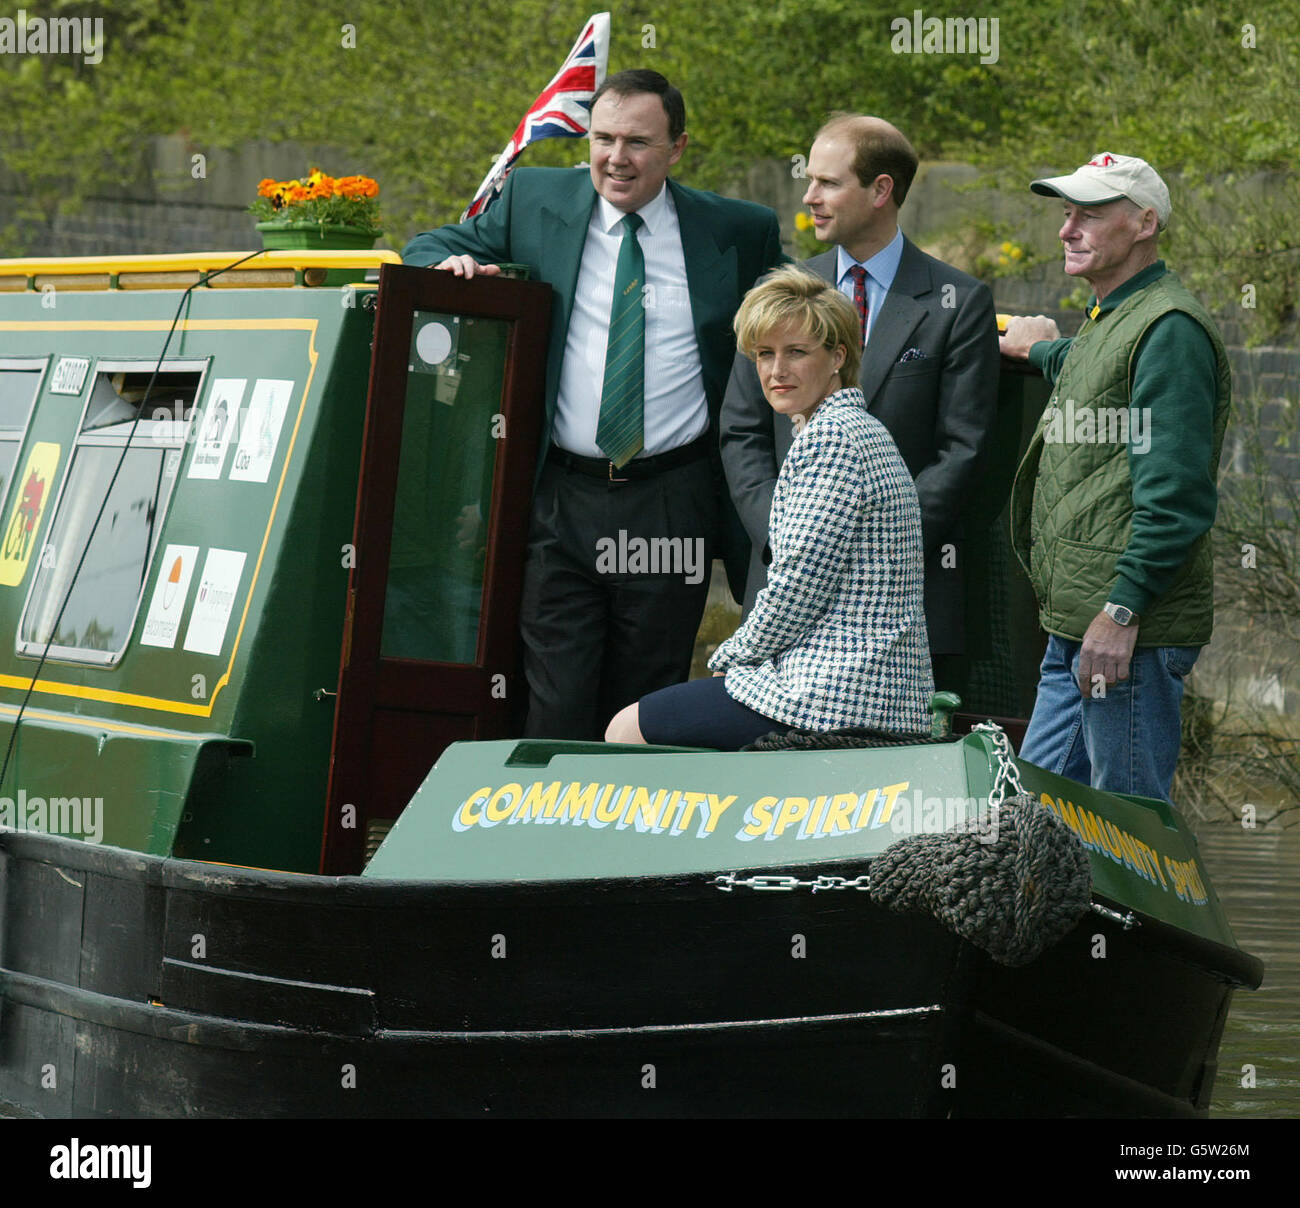 The Earl and Countess of Wessex enjoy a ride, on a community-run barge along the Ashton Canal in Manchester during a day long visit to the region. The 13-ton narrow boat was launched in 1996 as part of the regeneration of East Manchester carried out in the city's Olympic bid. Stock Photo